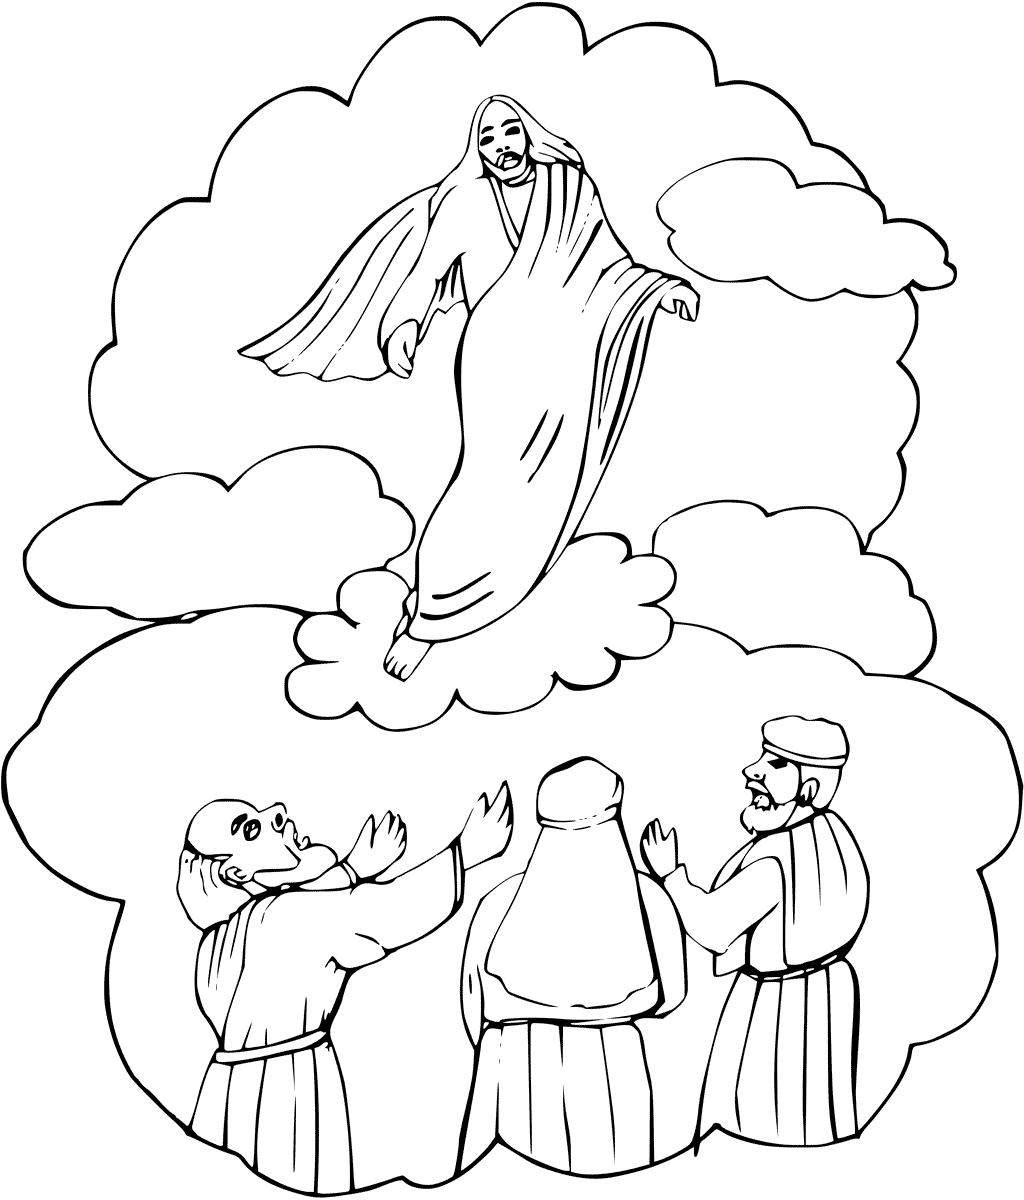 Resurrection coloring pages